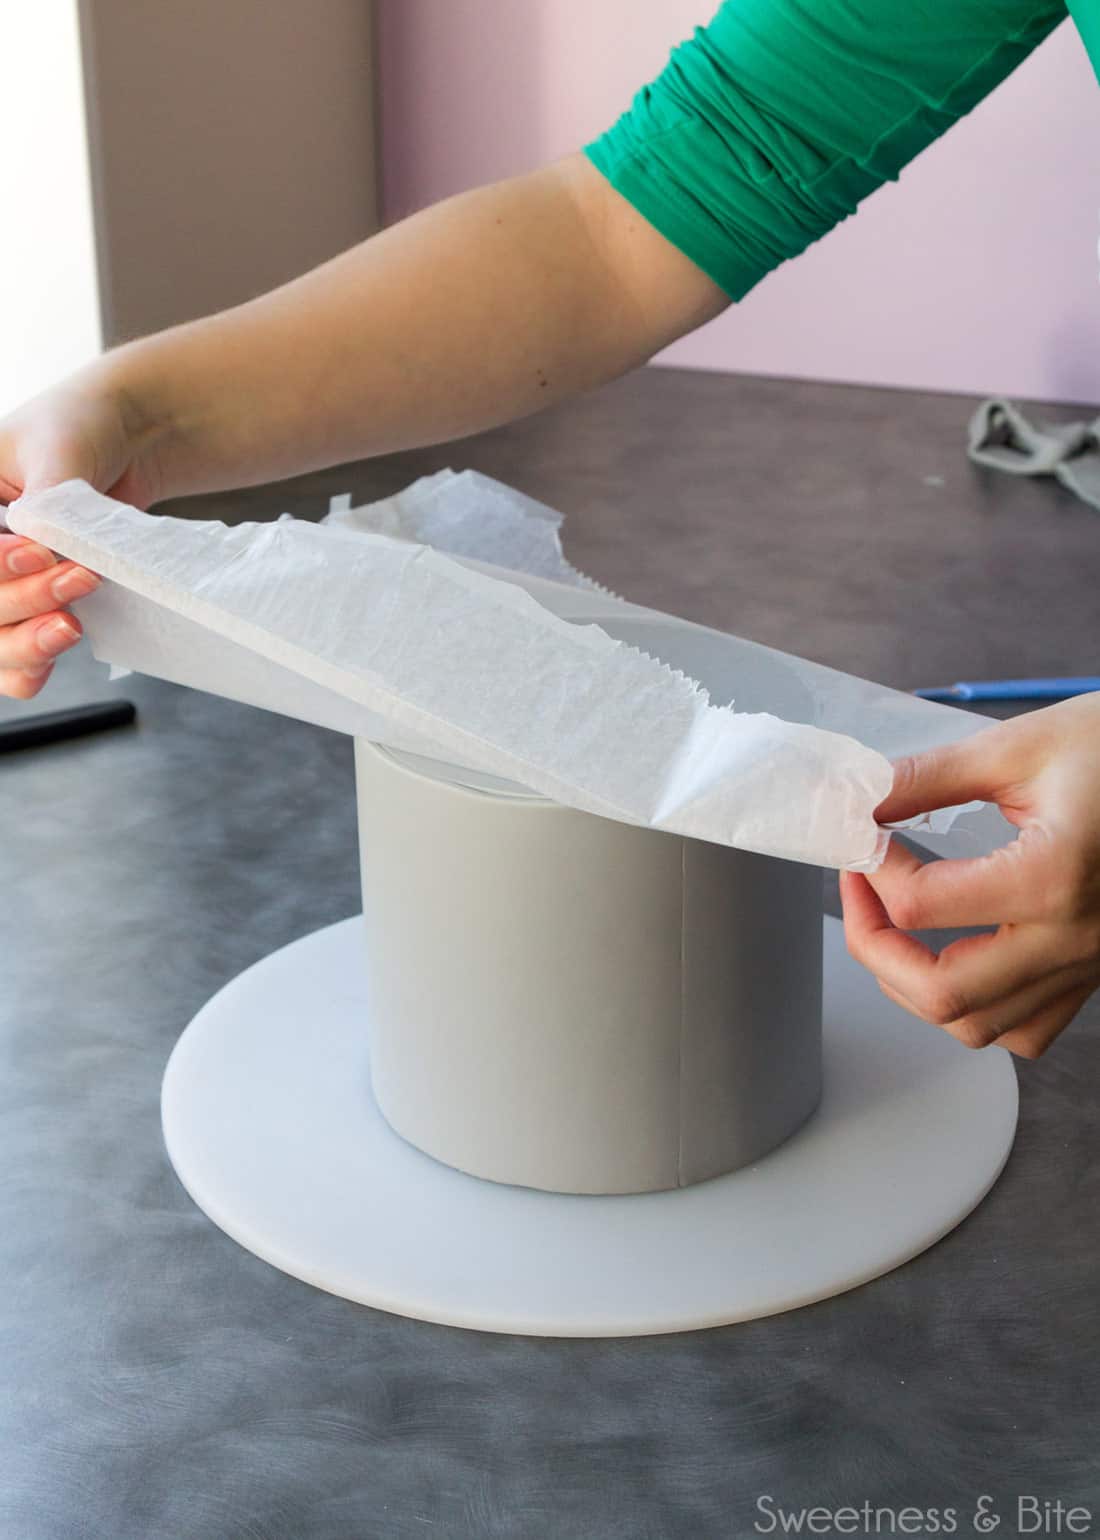 The waxed paper being peeled off the top of the cake.